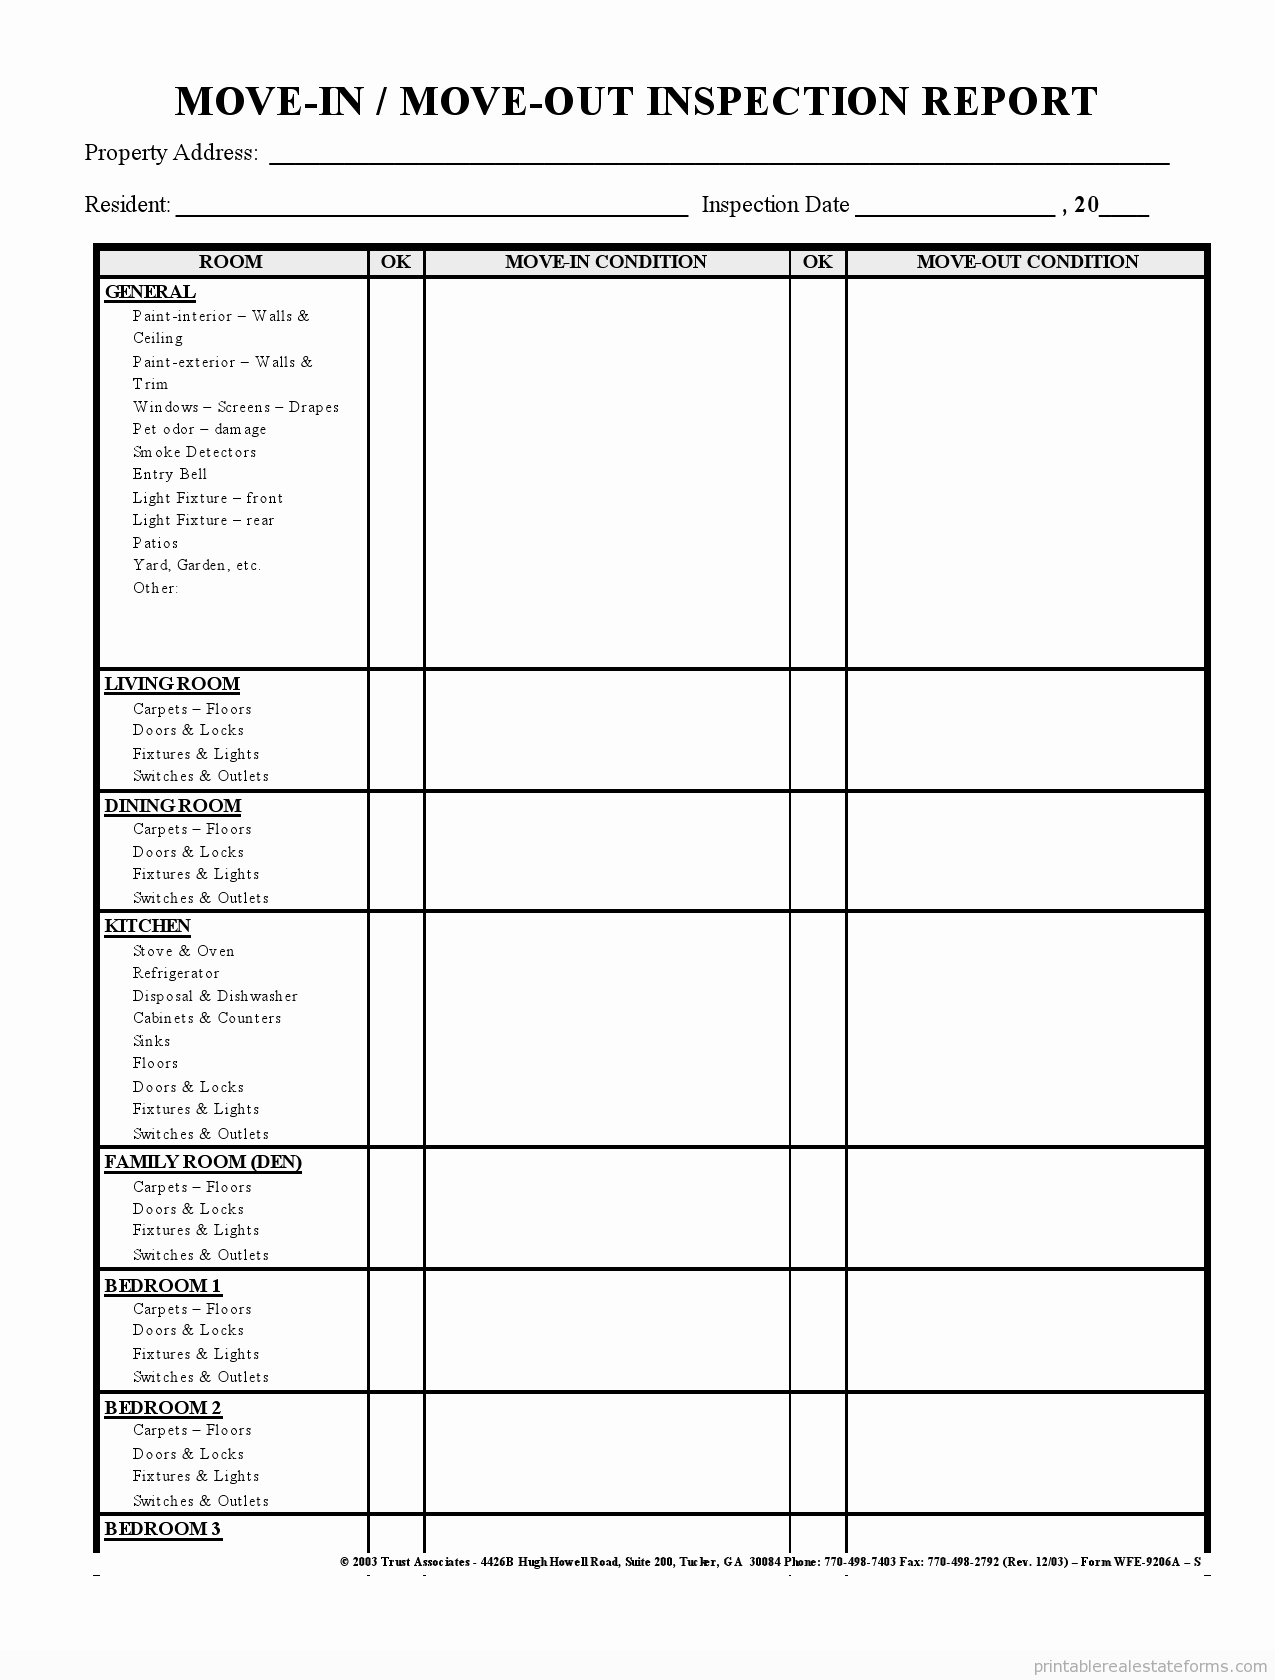 Property Management Checklist Template Elegant Sample Printable Move In Move Out Inspection Report form